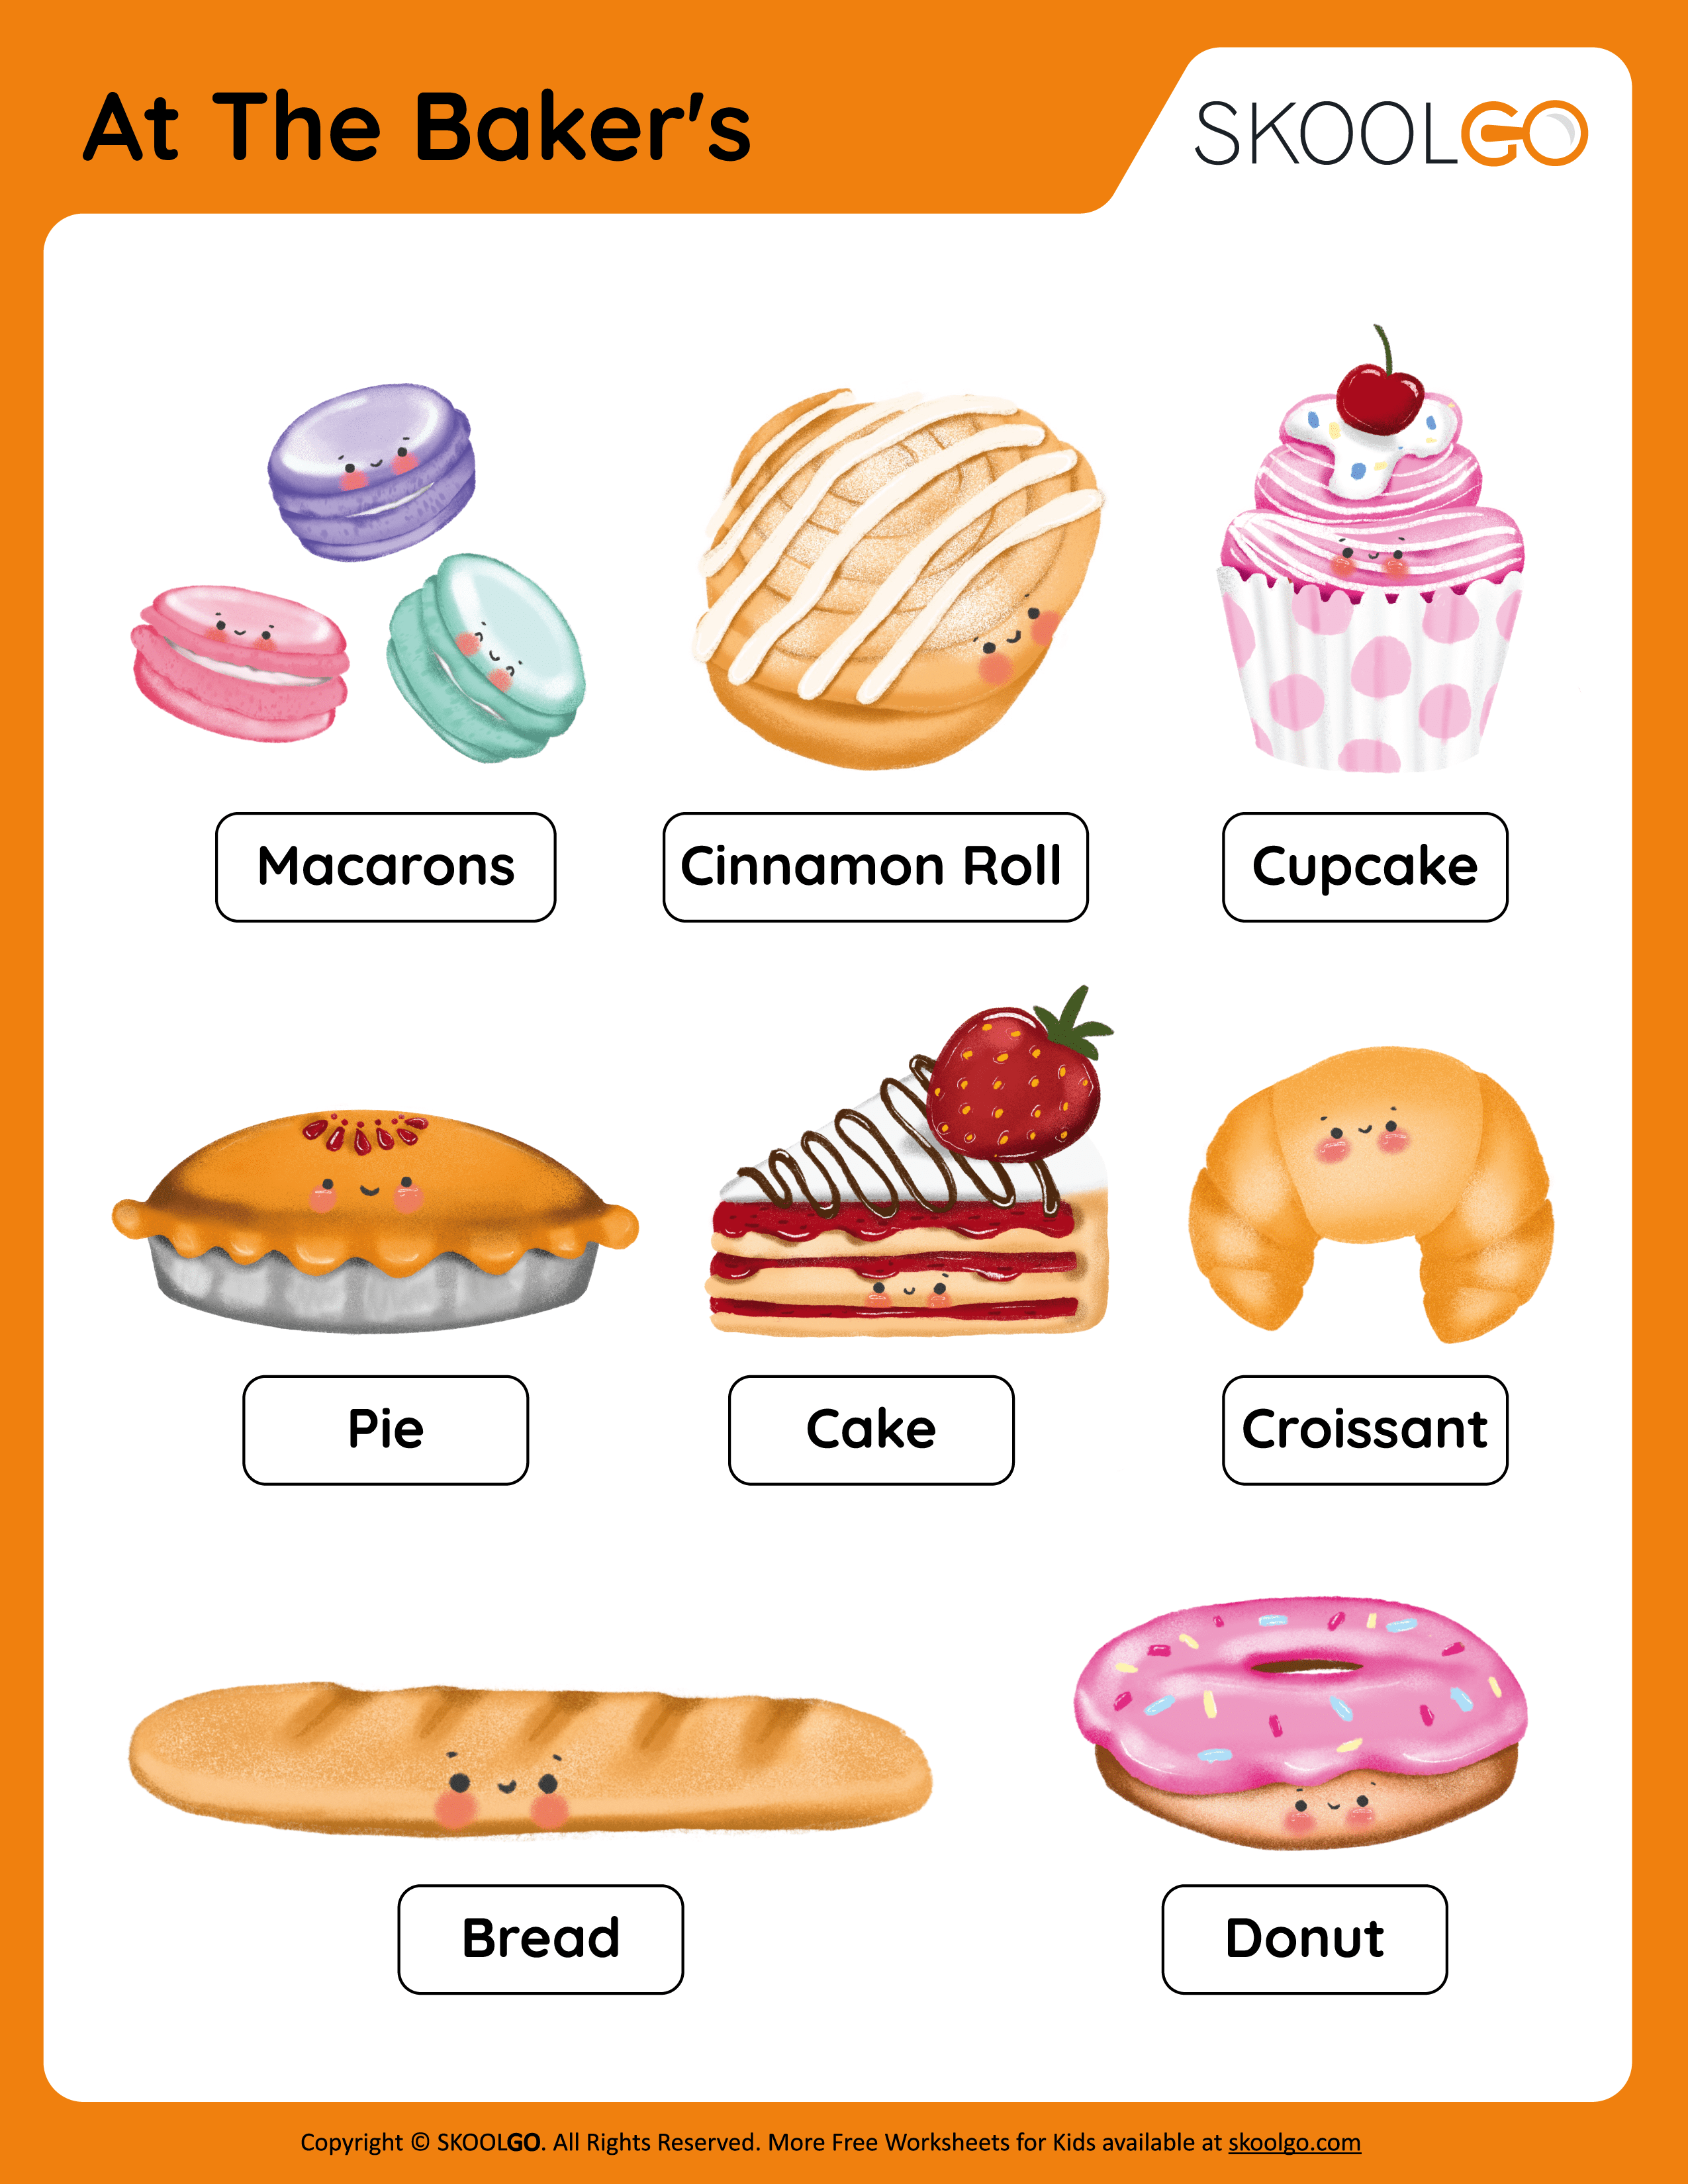 At The Bakers - Free Worksheet for Kids